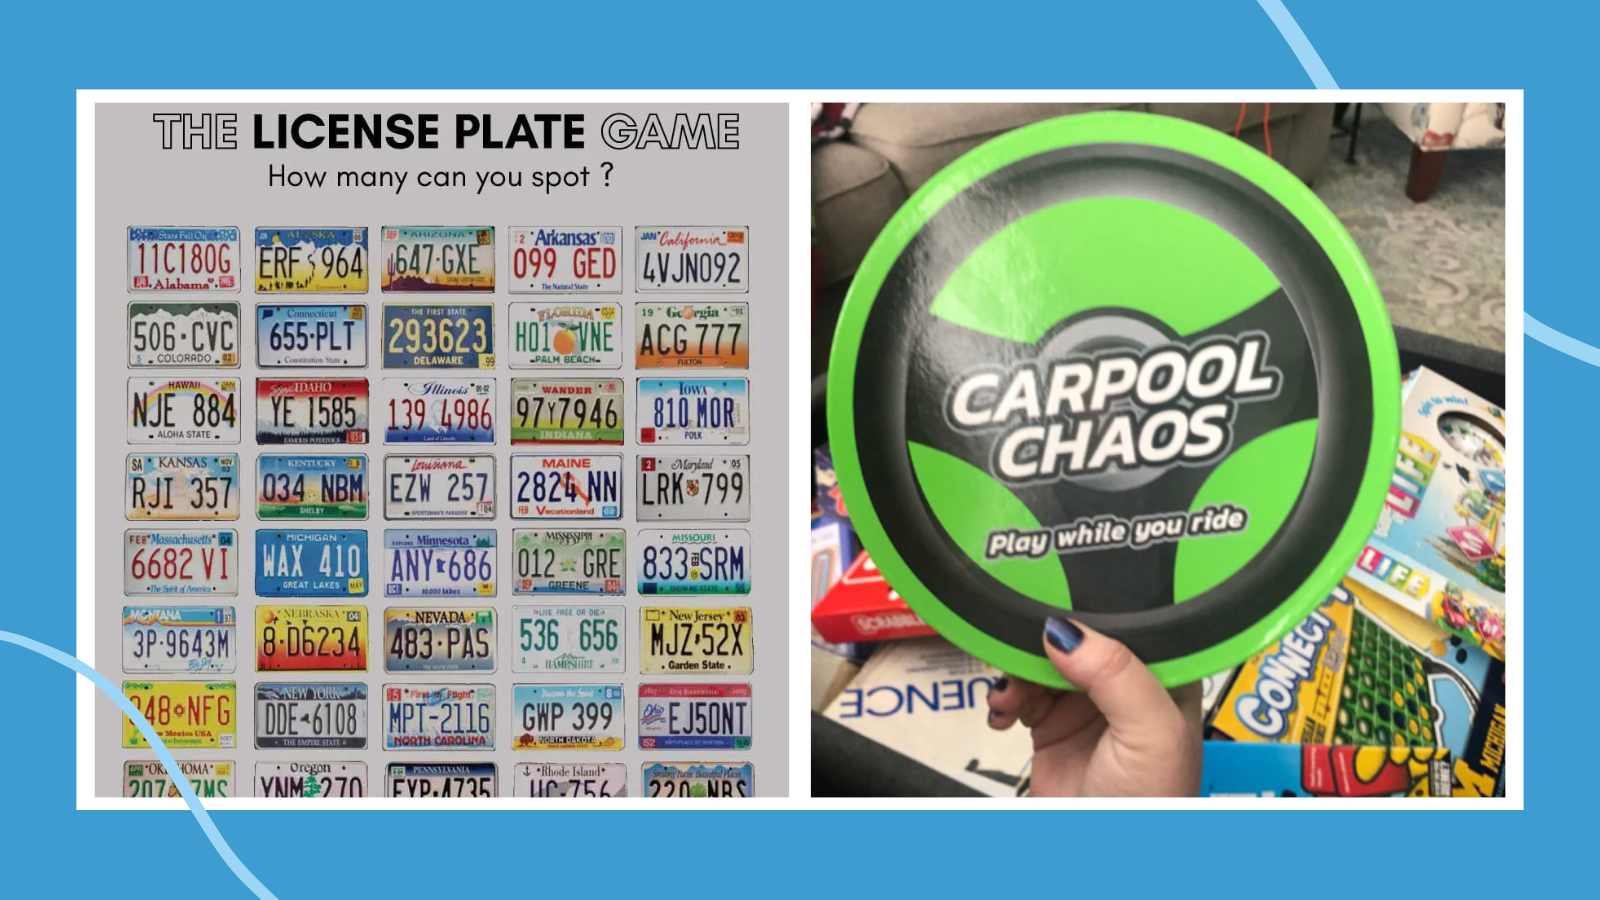 Road trip games including Carpool Chaos game and License Plate Bingo.